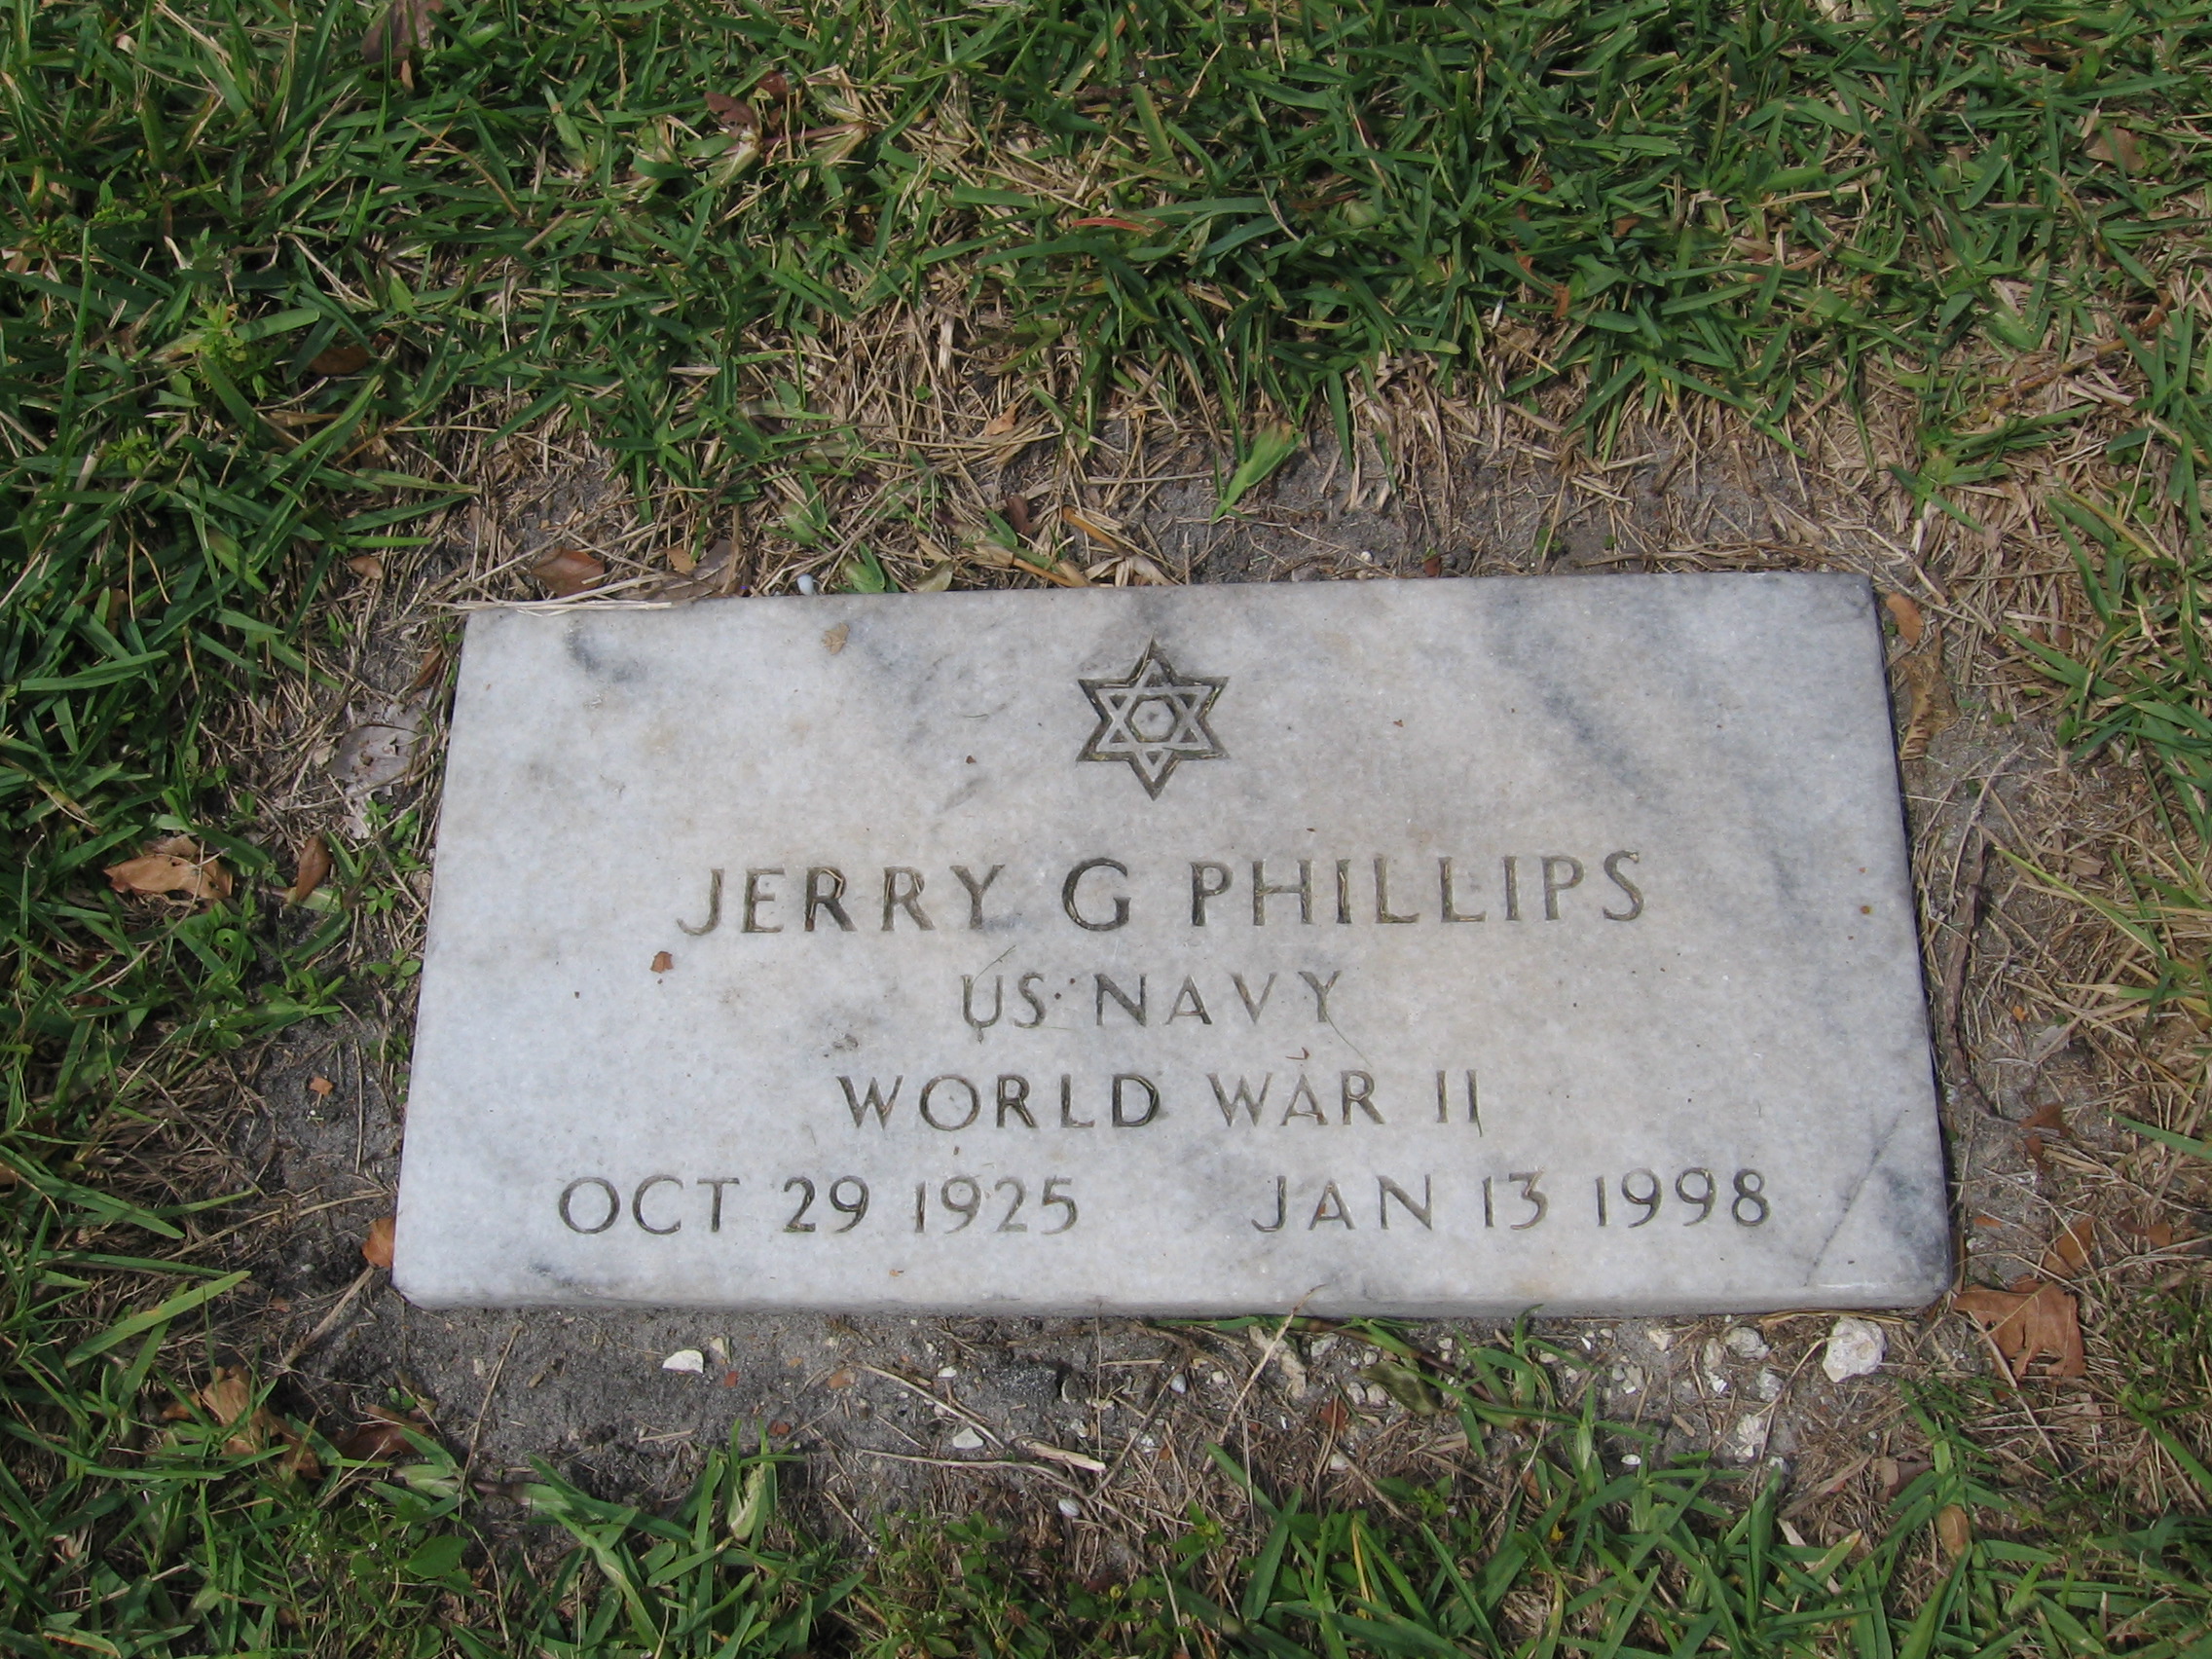 Jerry G Phillips